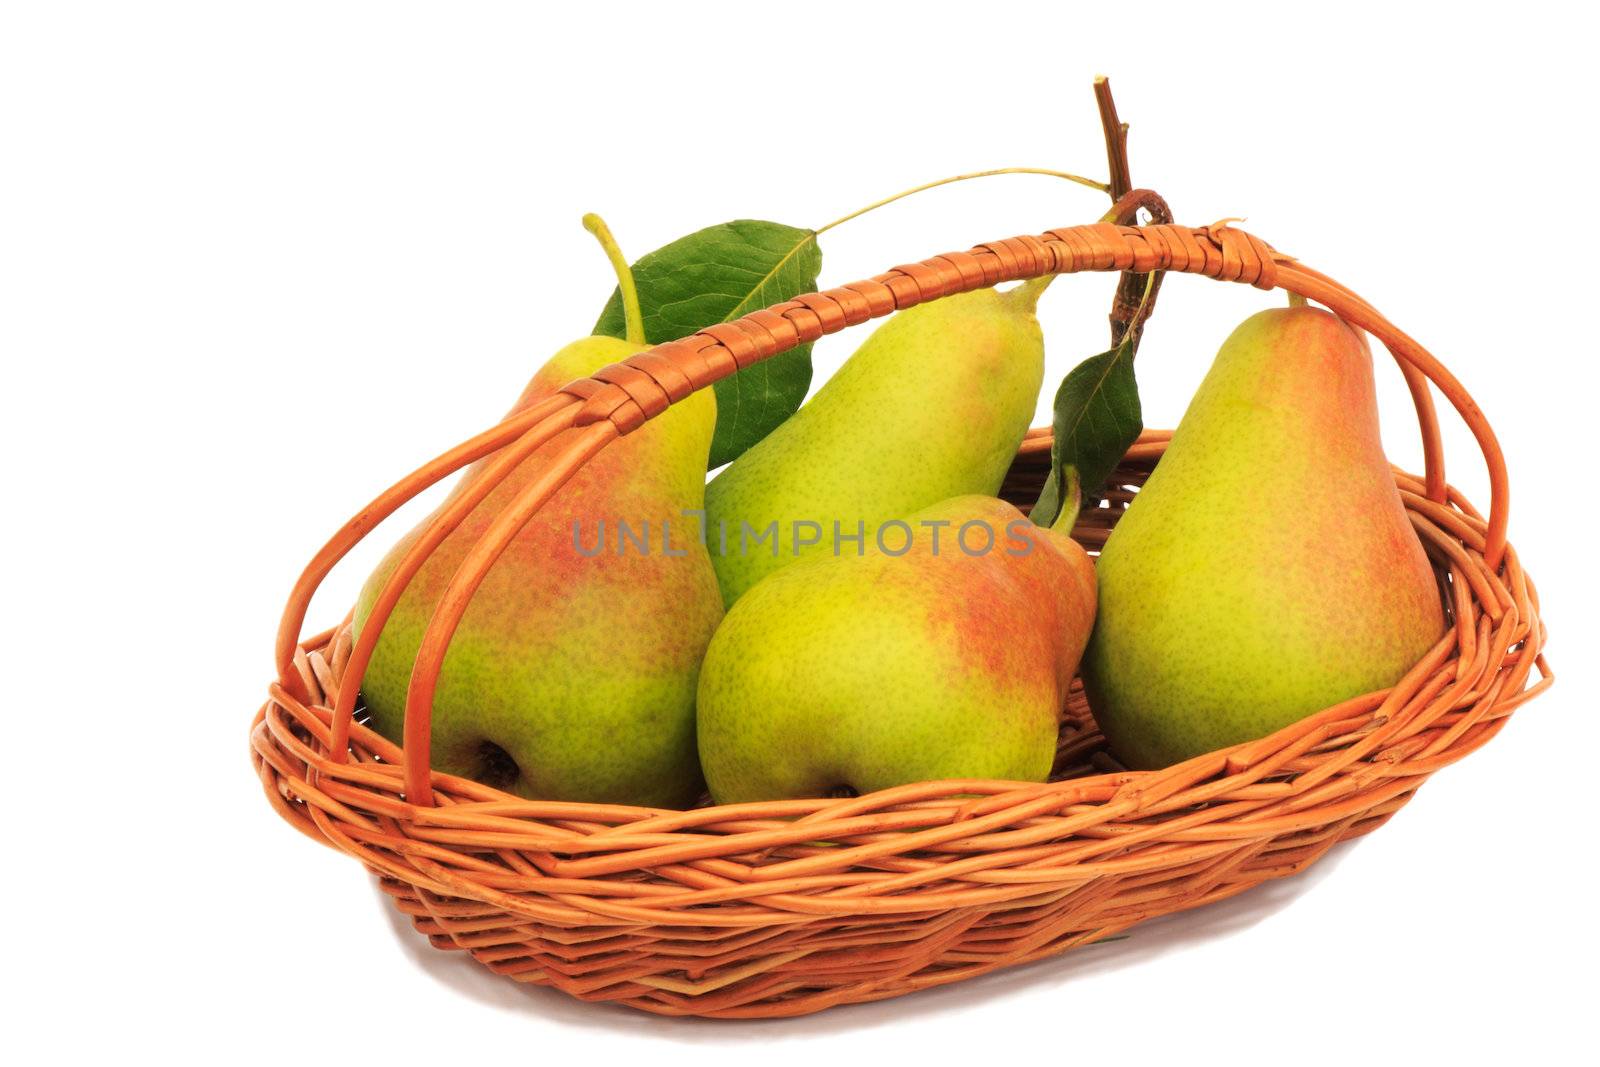 Large ripe pears in a wicker basket on a white background. by georgina198